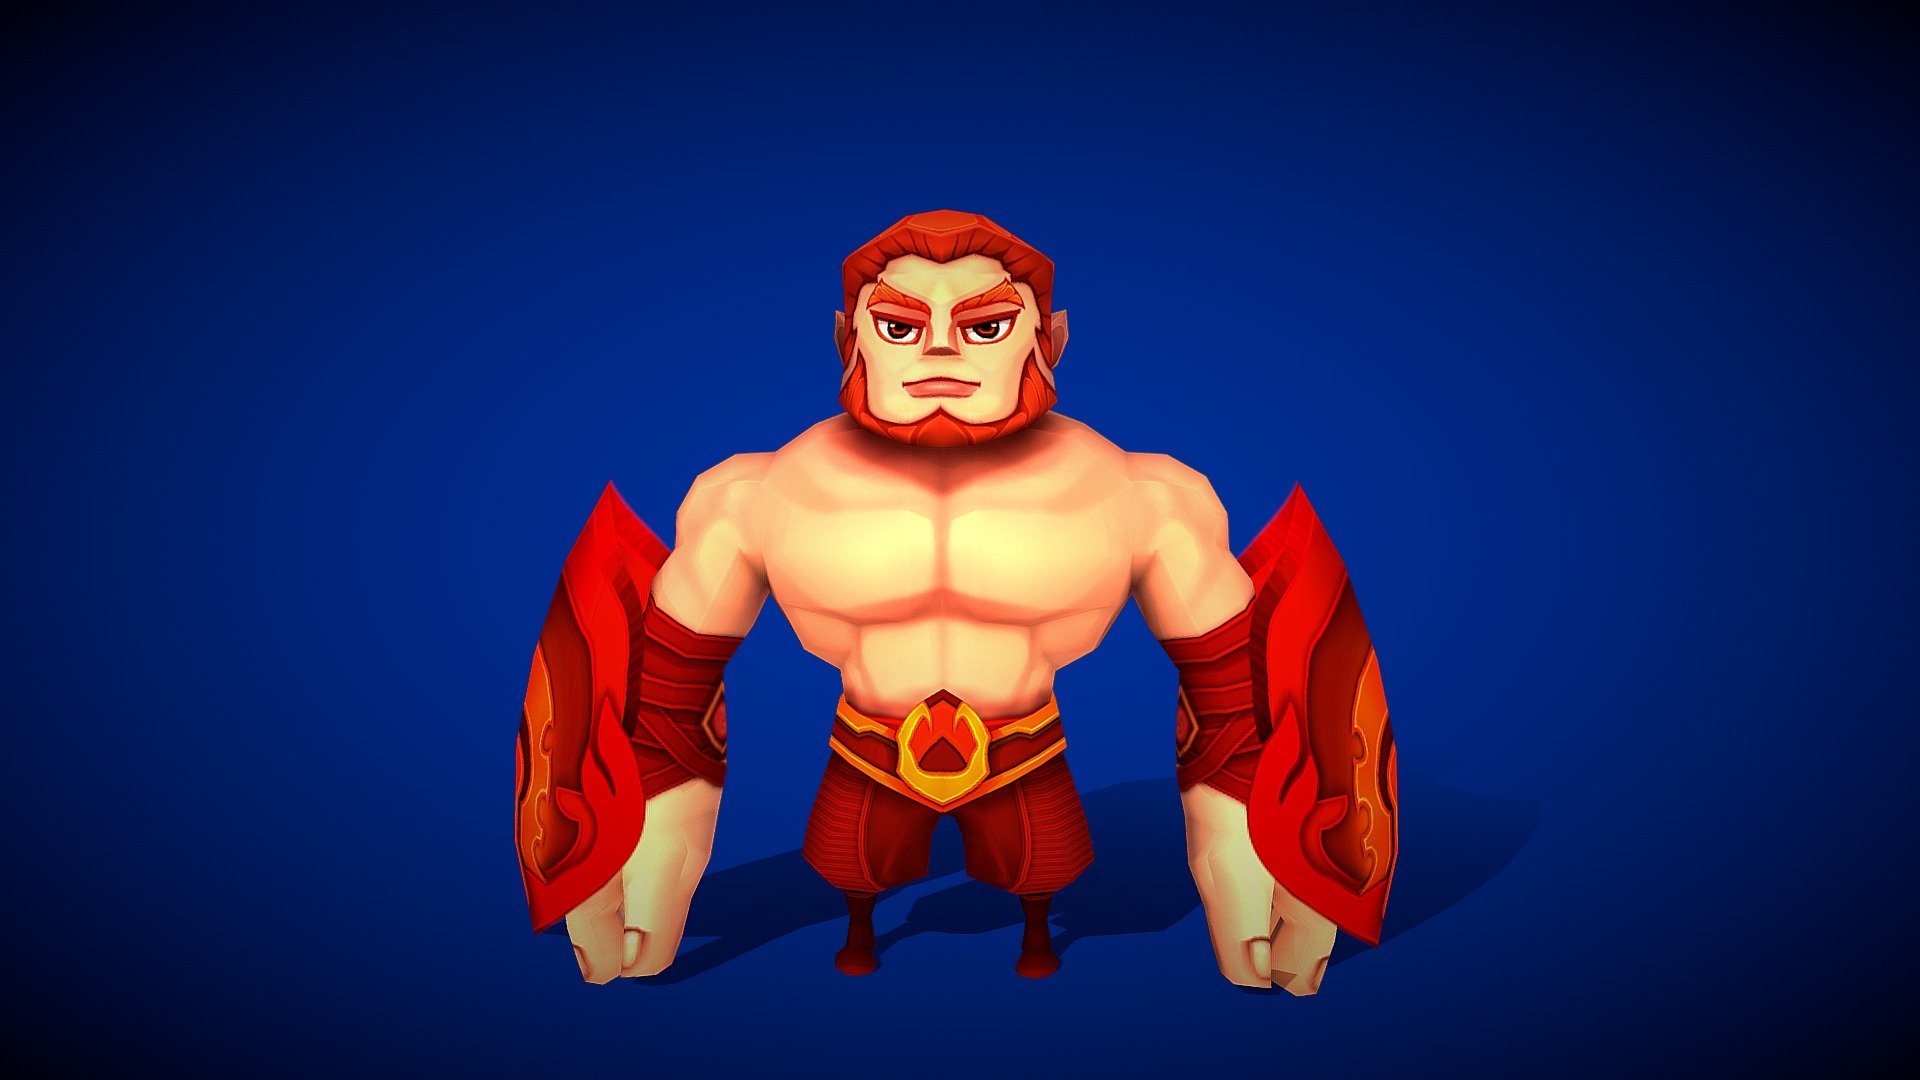 This set includes Low-poly fantasy Cartoon Fighters, which are rigged and animated. 

Textures are hand painted and available in 4 colors. Each color versions has 3 levels. 

Suitable for TD games, at role of tank with high attack damage and toughness ability .  

Character includes 13 animations:

- Idle 01: 20 - 60

-  Run: 70 - 100 
- Attack 03: 110 - 190

- Idle 02: 200 - 320

- Idle 03:  330 - 420 
-  Walk:    430 - 480

-  Attack 01:   490 - 520

-  Attack 02: 530 - 580

-  Hurt:    590 - 630

-  Skill 01: 640 - 690 
-  Skill 02:    700 - 785

-  Die 01:  800 - 870

-  Die 02:  880 - 920 - Cartoon Fighter - 3D model by souchenki 3d model